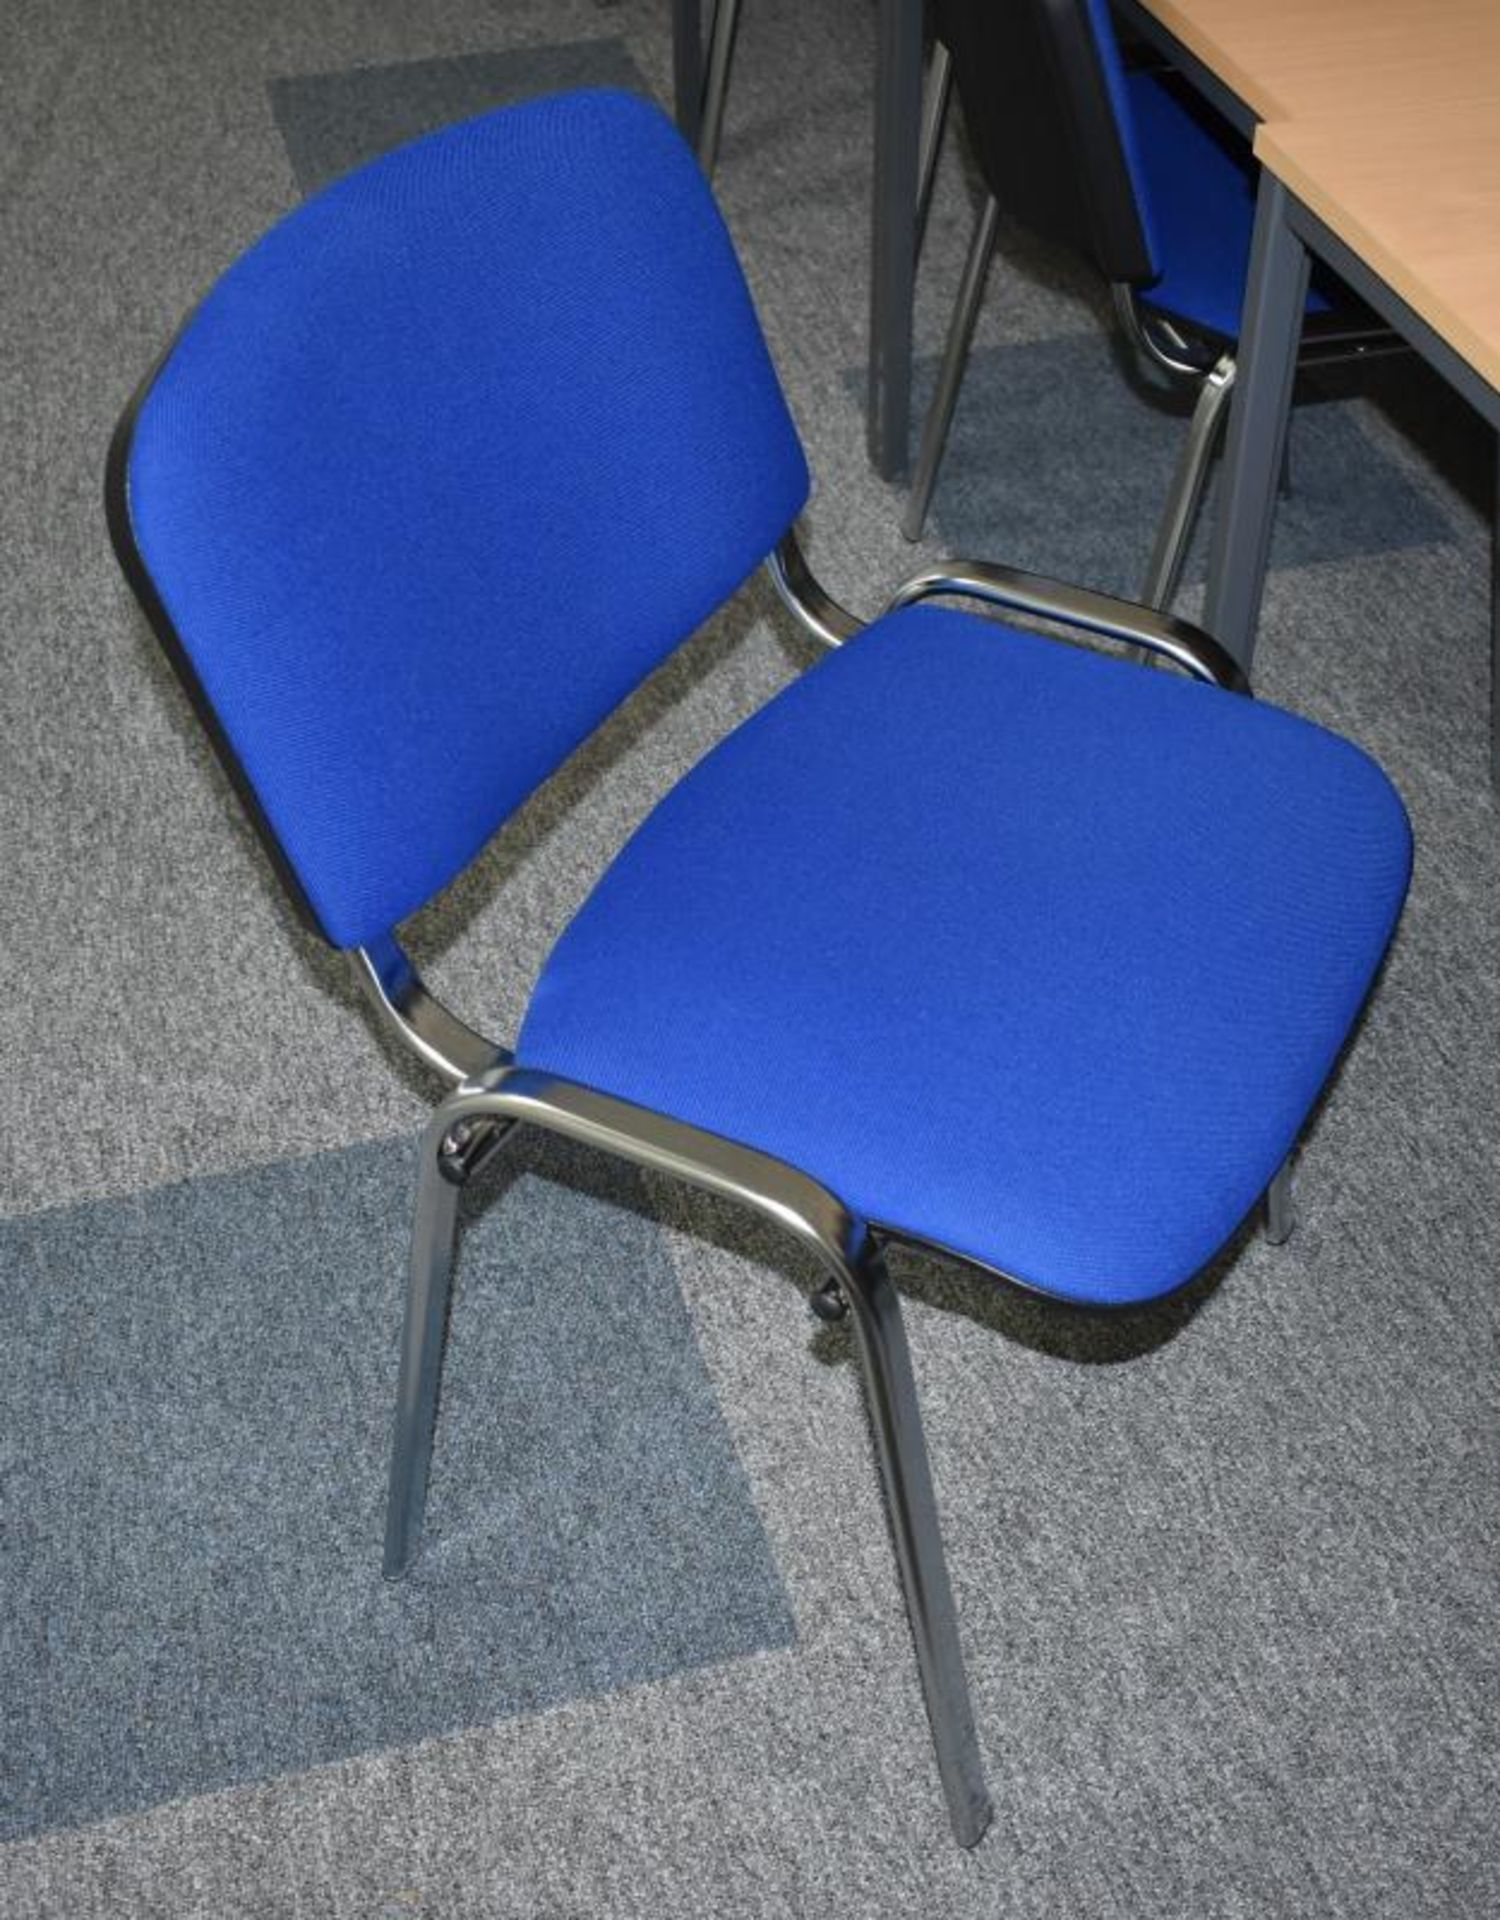 10 x Stackable Office Chairs Upholsted in Blue Fabric - CL490 - Location: Putney, London, SW15